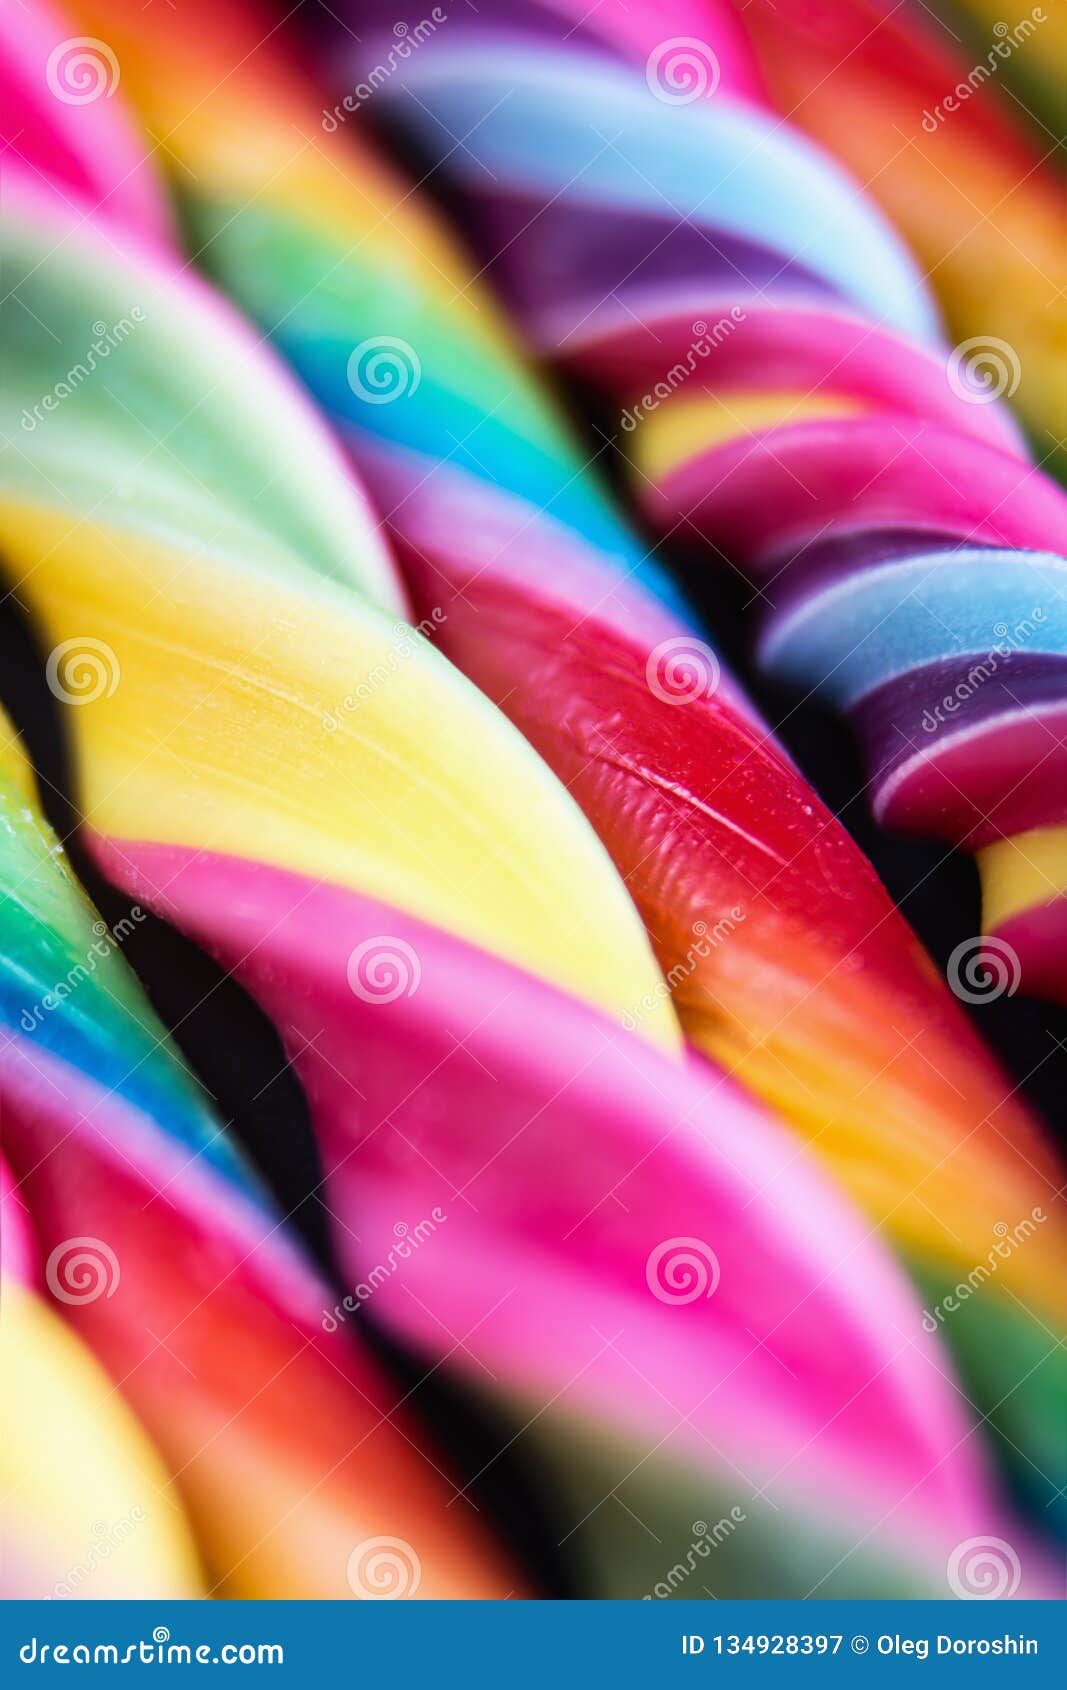 Candy Canes of Different Colors of the Rainbow Stock Image - Image of ...